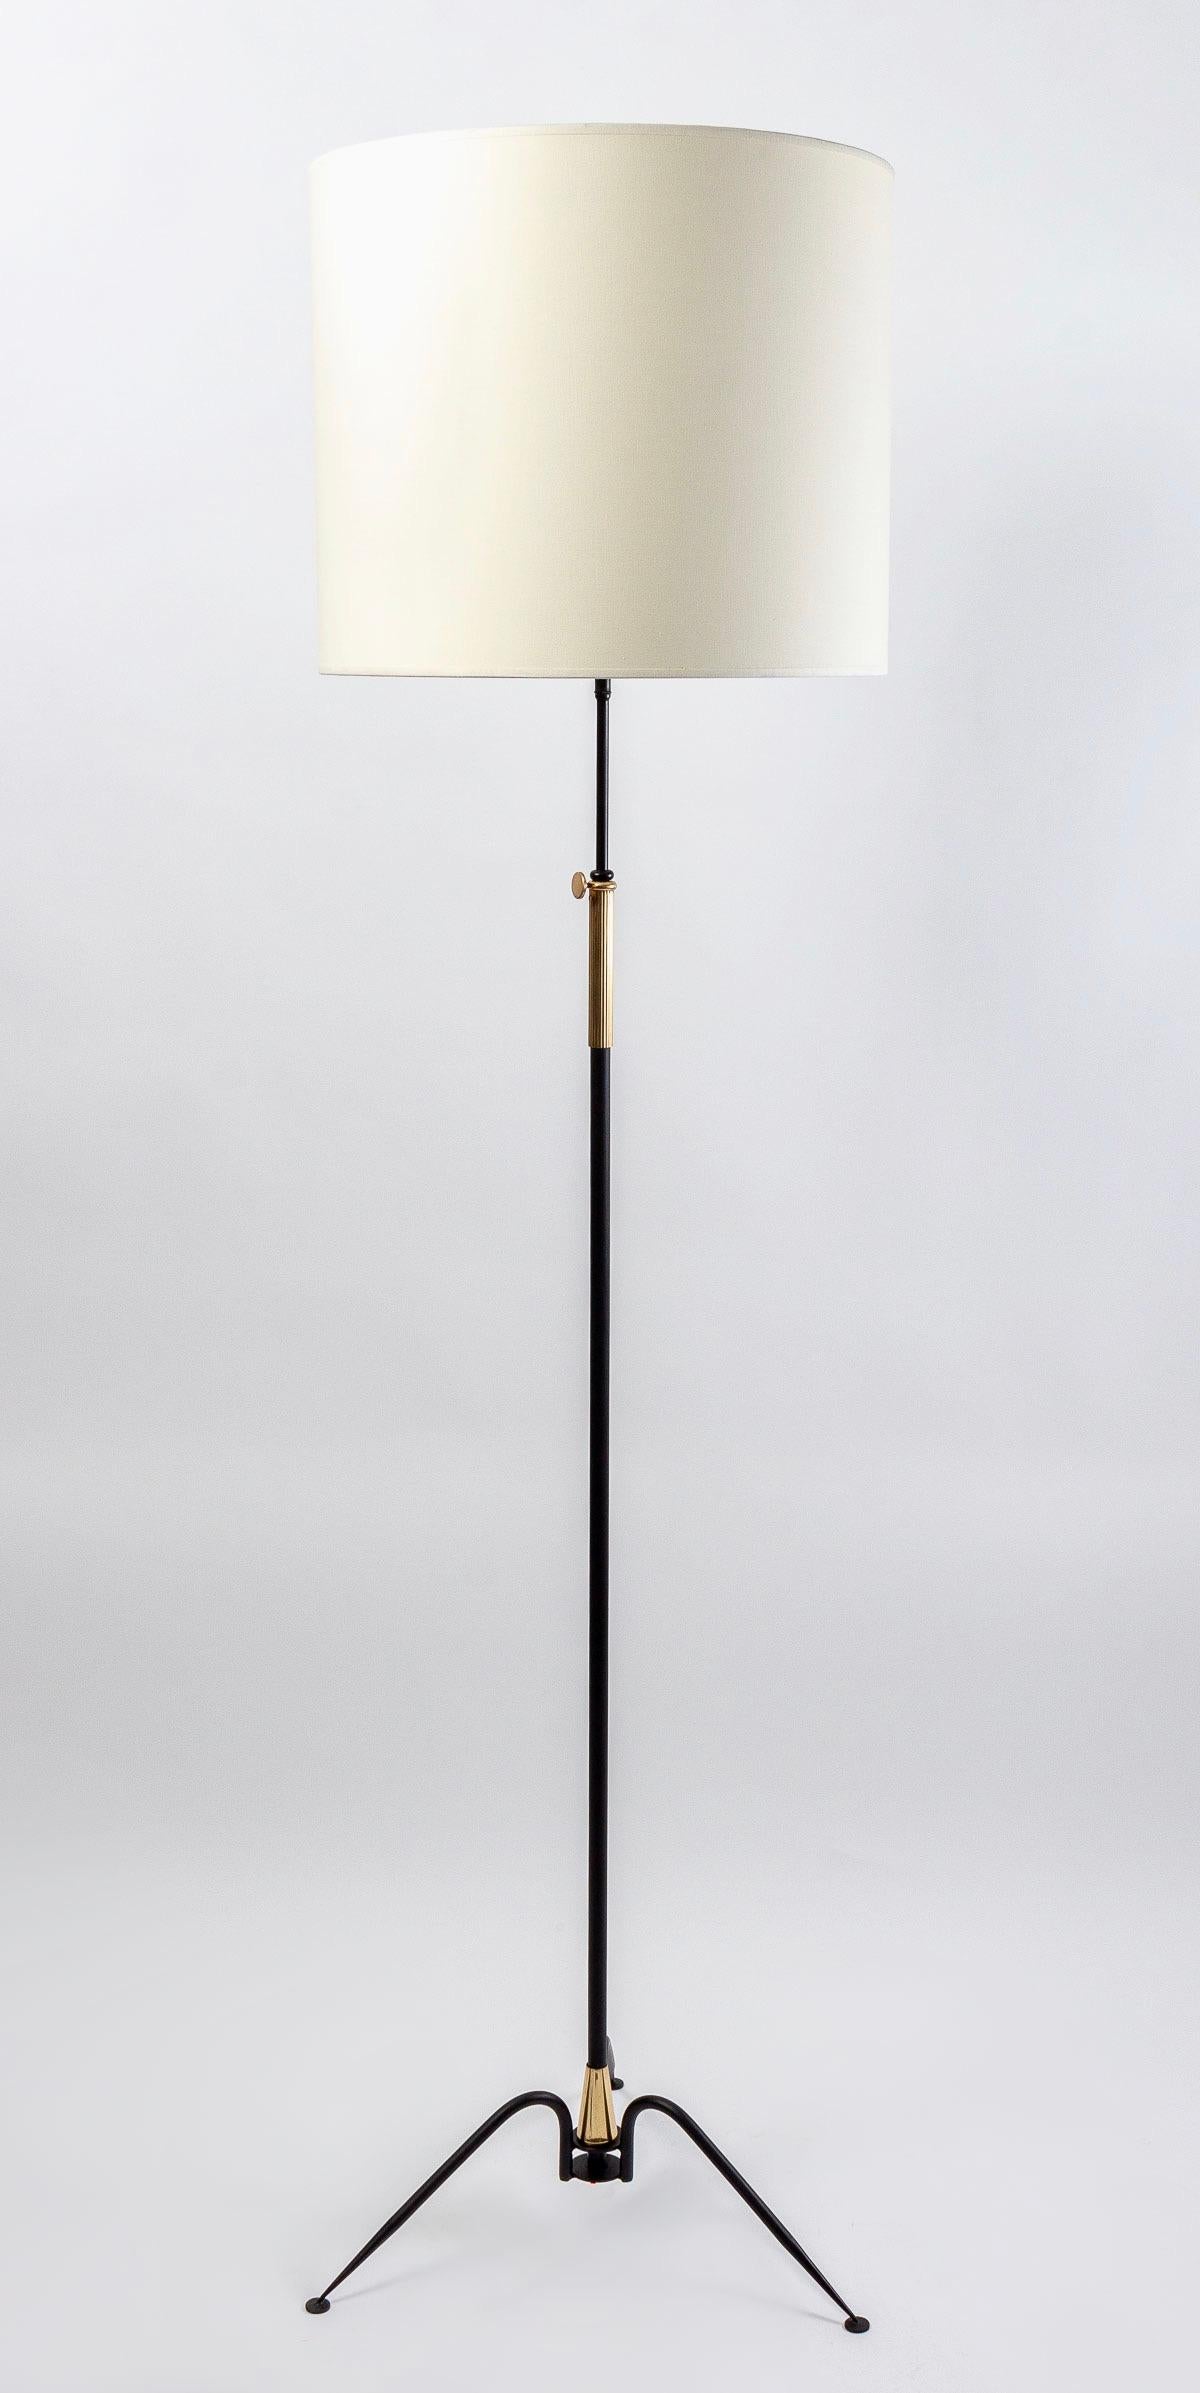 Composed of a central rod of round section in black wrought iron enhanced with golden brass on the upper part and embellished with a knob that allows to adjust the height of the floor lamp.
The base is composed of 3 pretty feet resting on 3 small